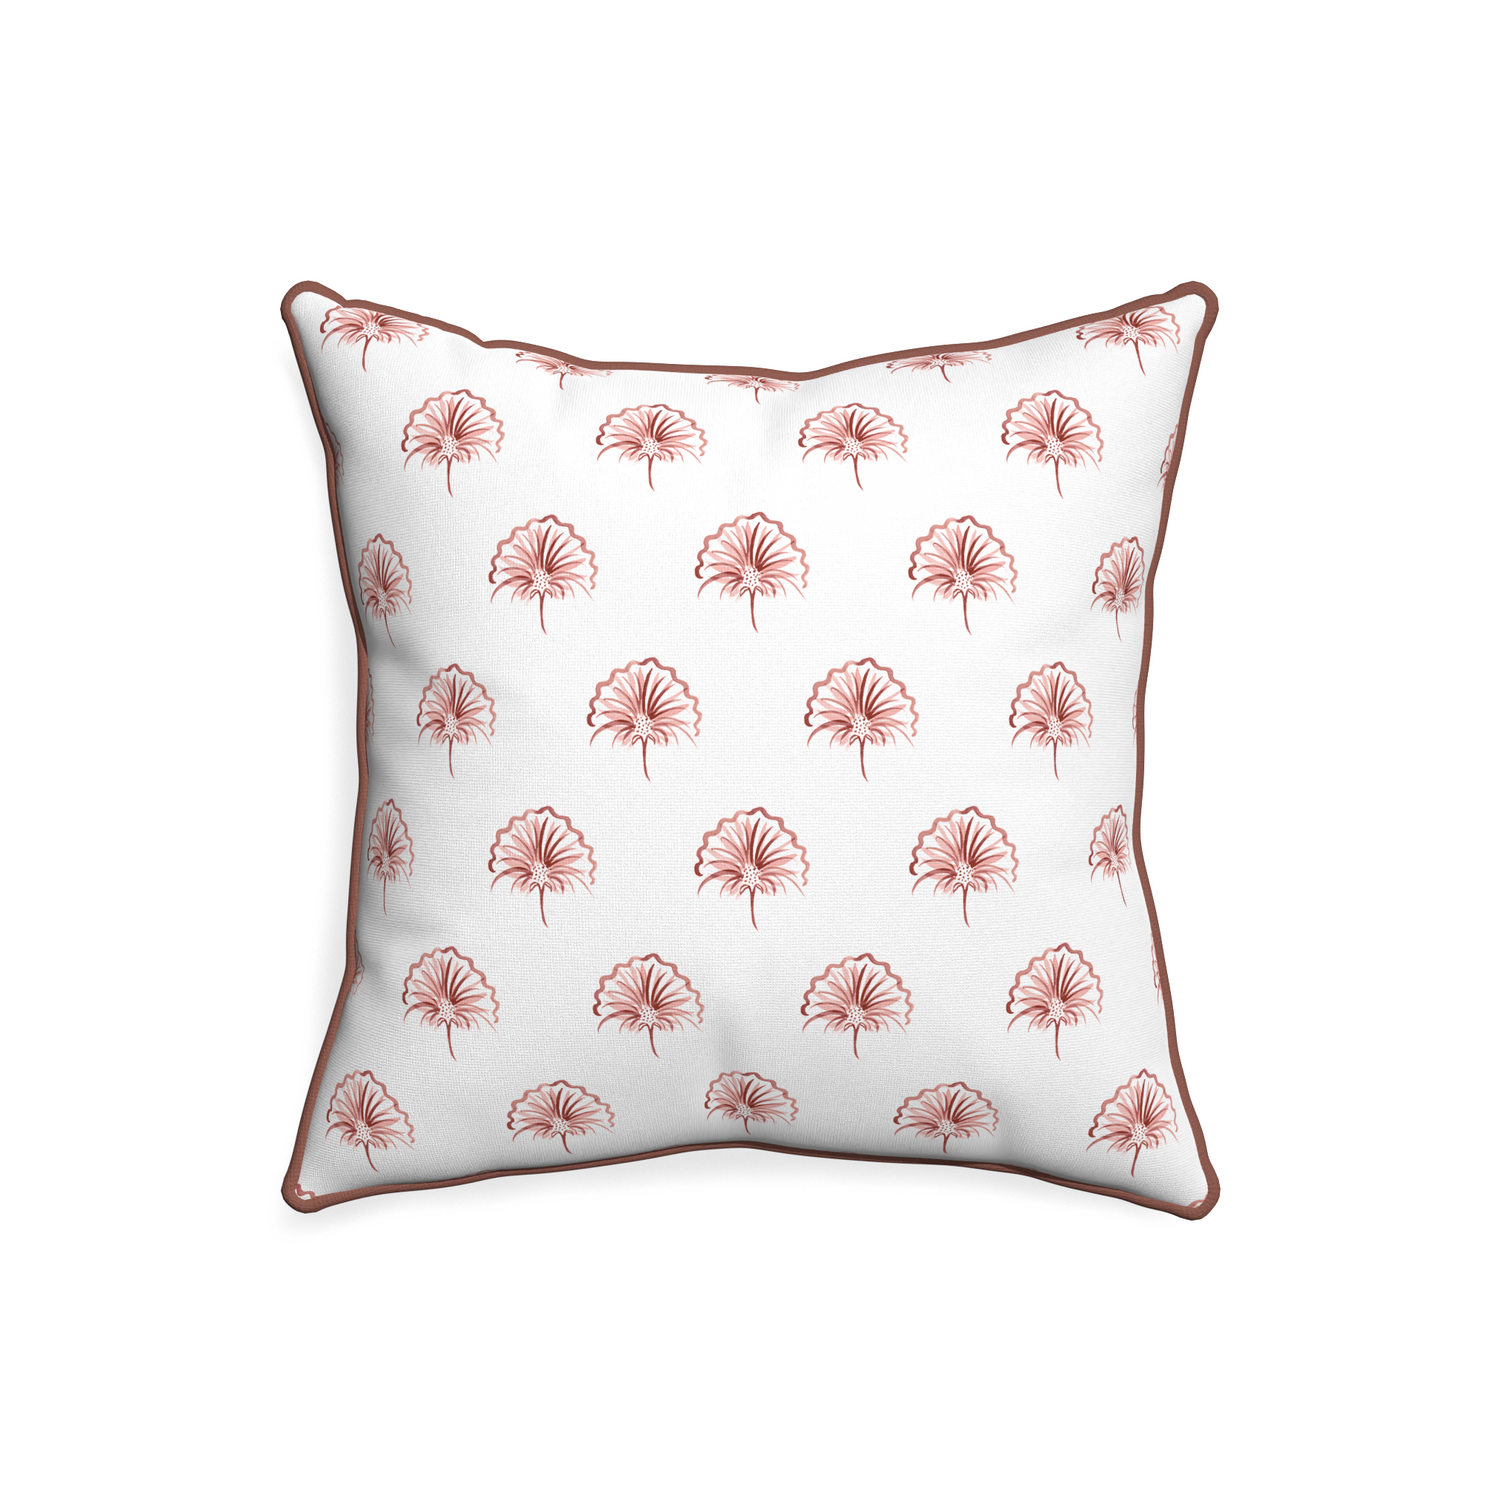 20-square penelope rose custom pillow with w piping on white background